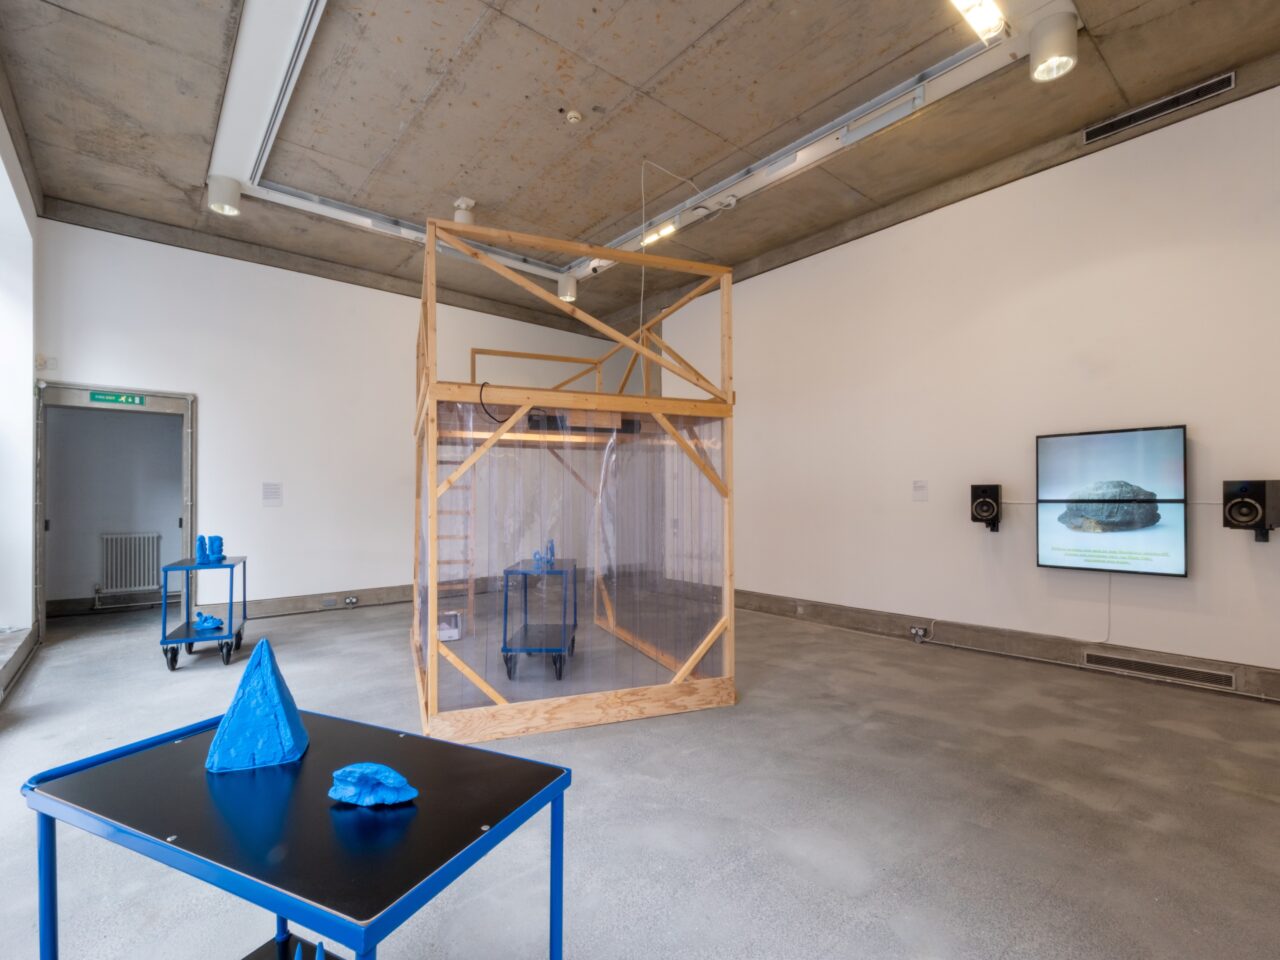 a gallery installation with white walls and grey floor. There is a black table with small blue sculptures. In the background, there is a video playing on a TV. In the middle of the room is a wooden framed structure with an enclosed plastic area.